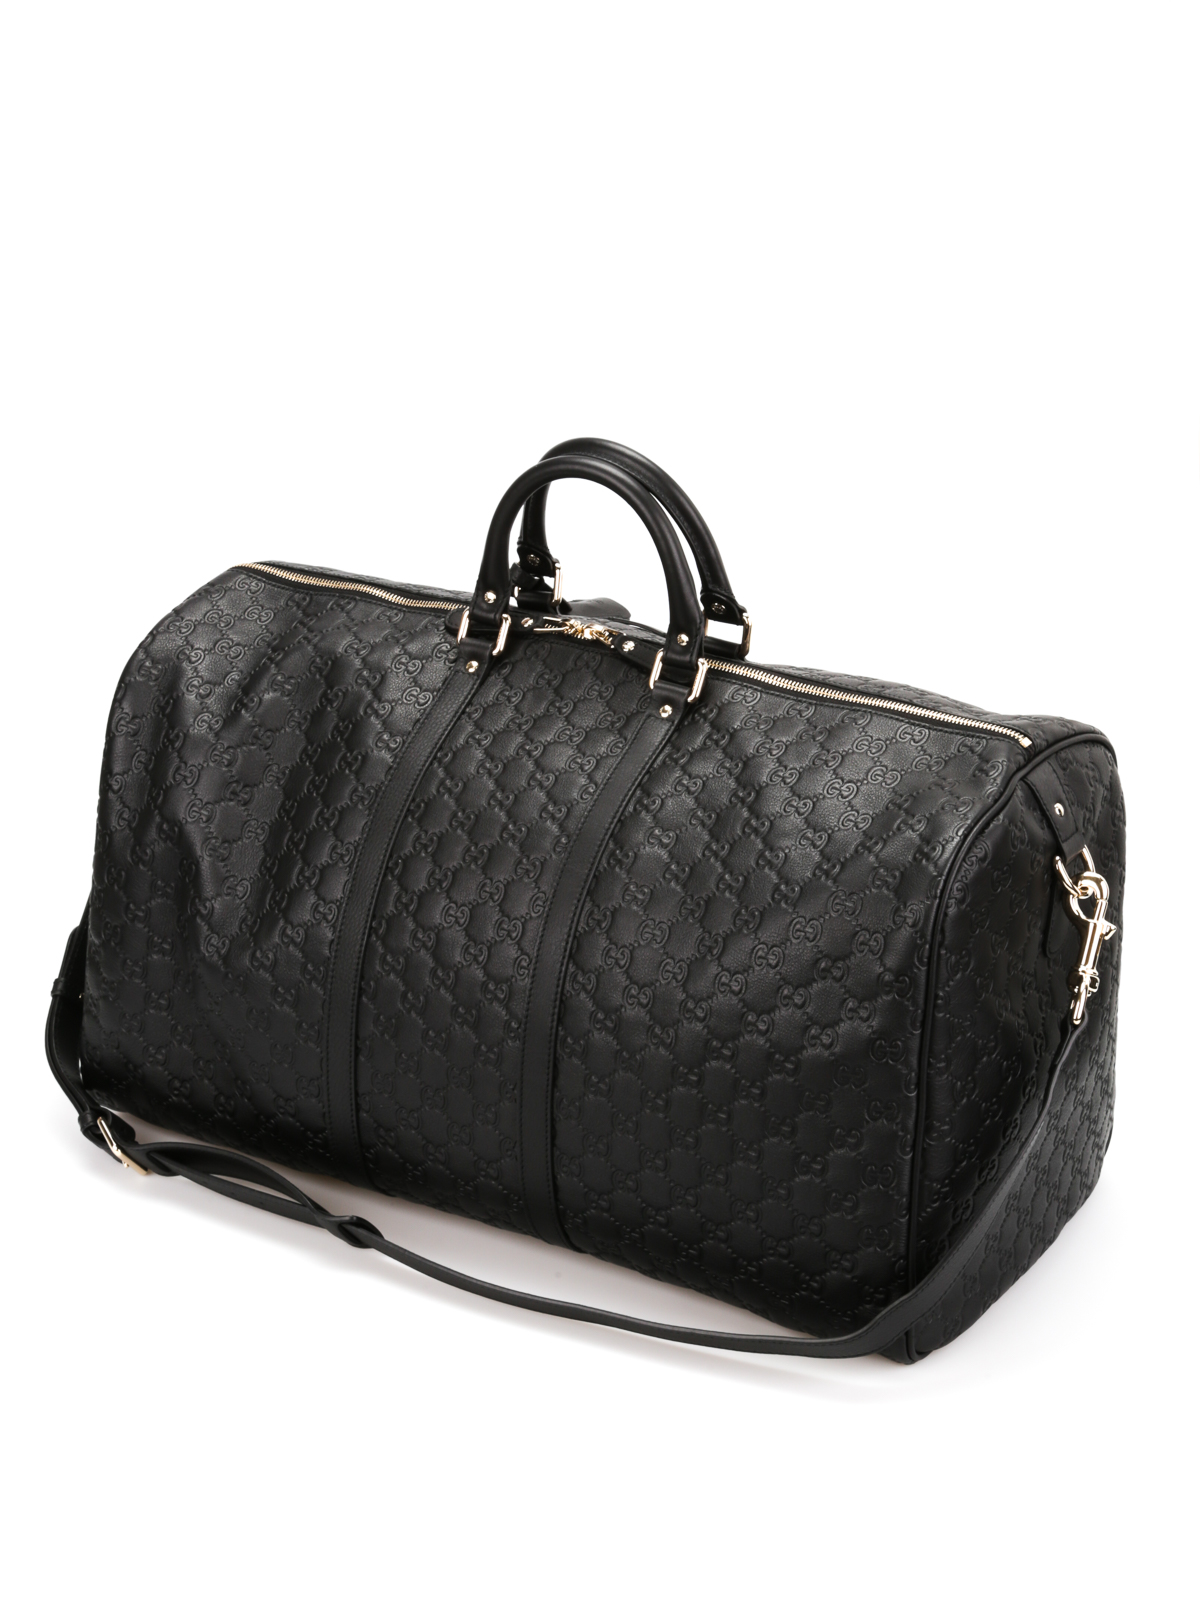 Gucci - Carry on duffle bag - Luggage 